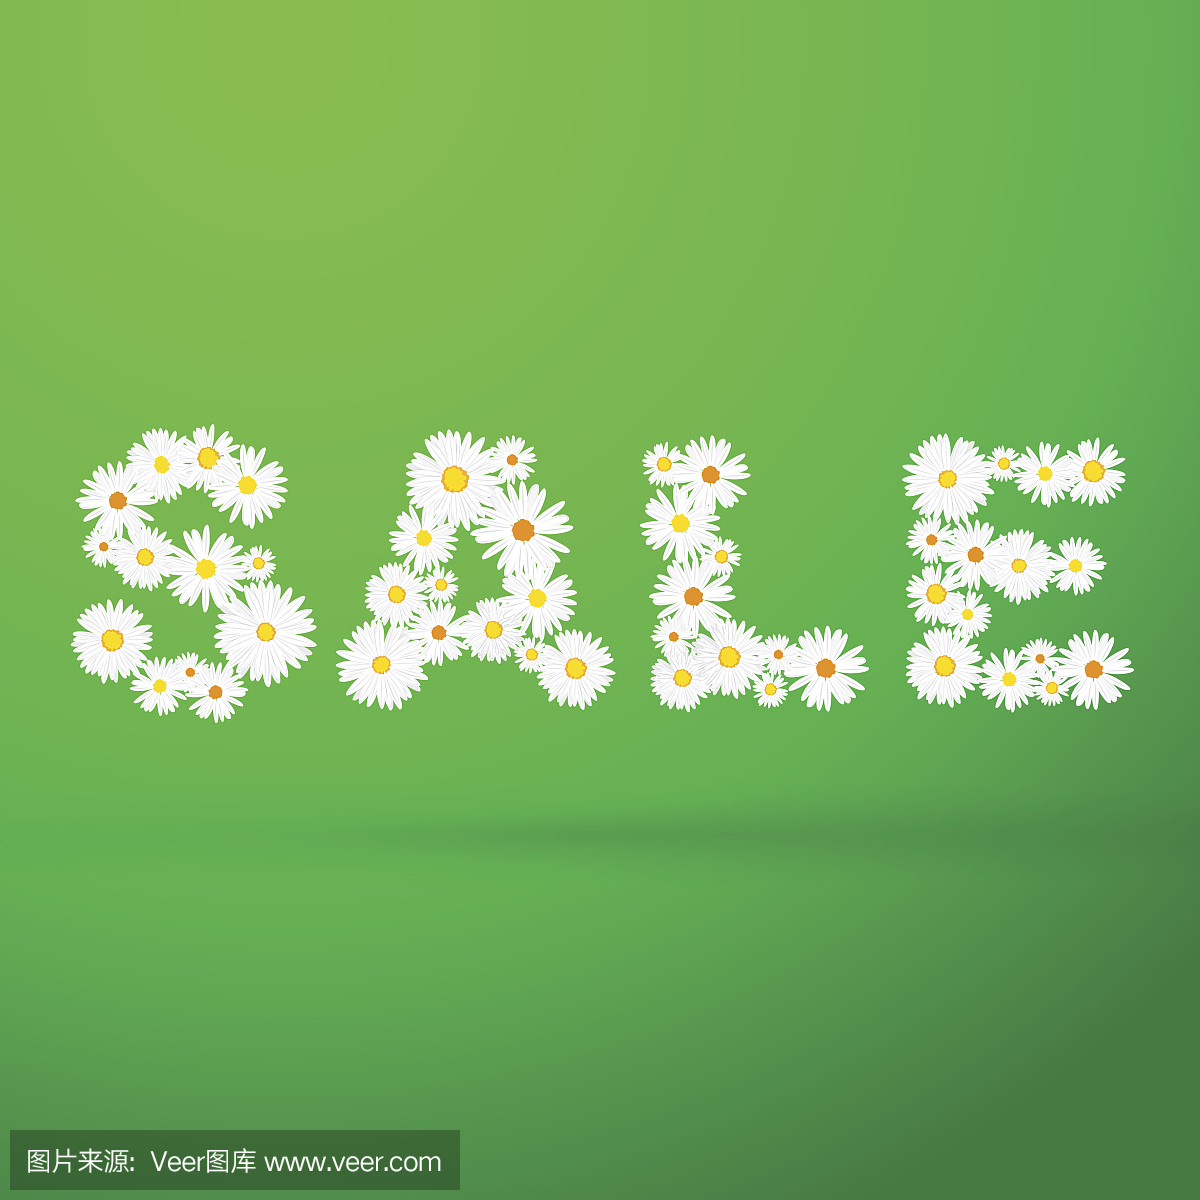 Spring sale message with flowers